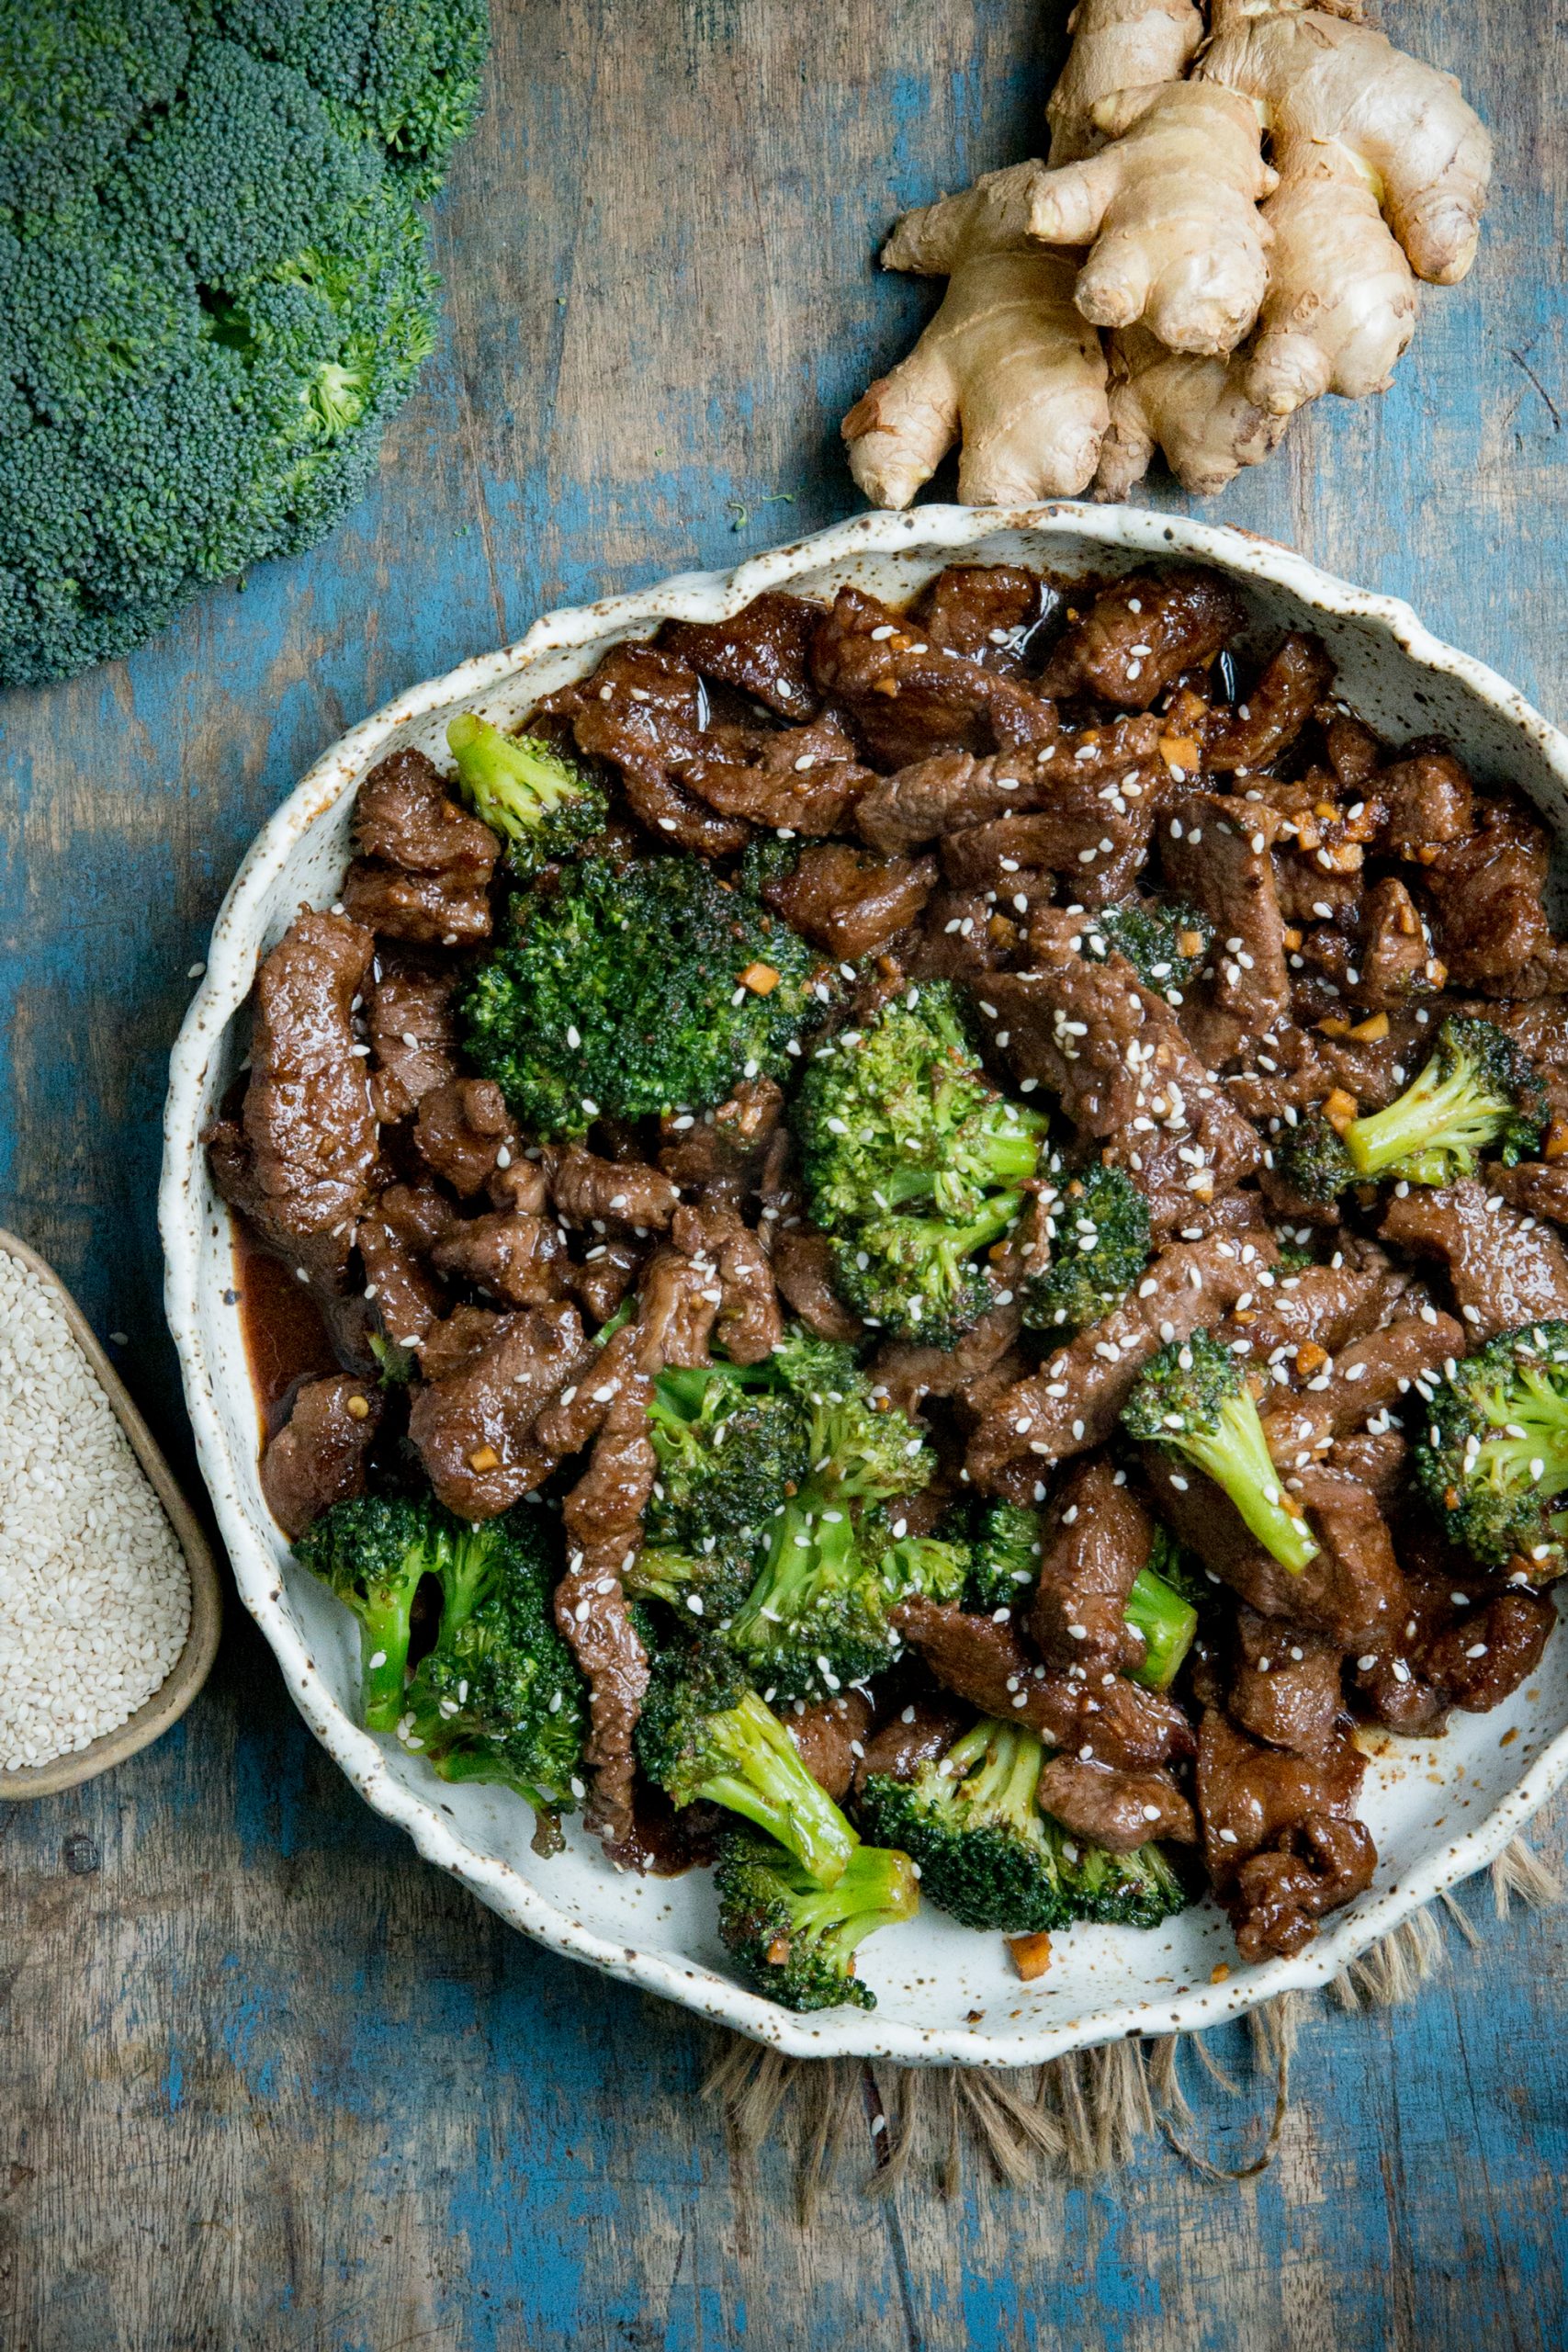 Low-Carb Beef and Broccoli (Keto-Friendly) - Simply So Healthy